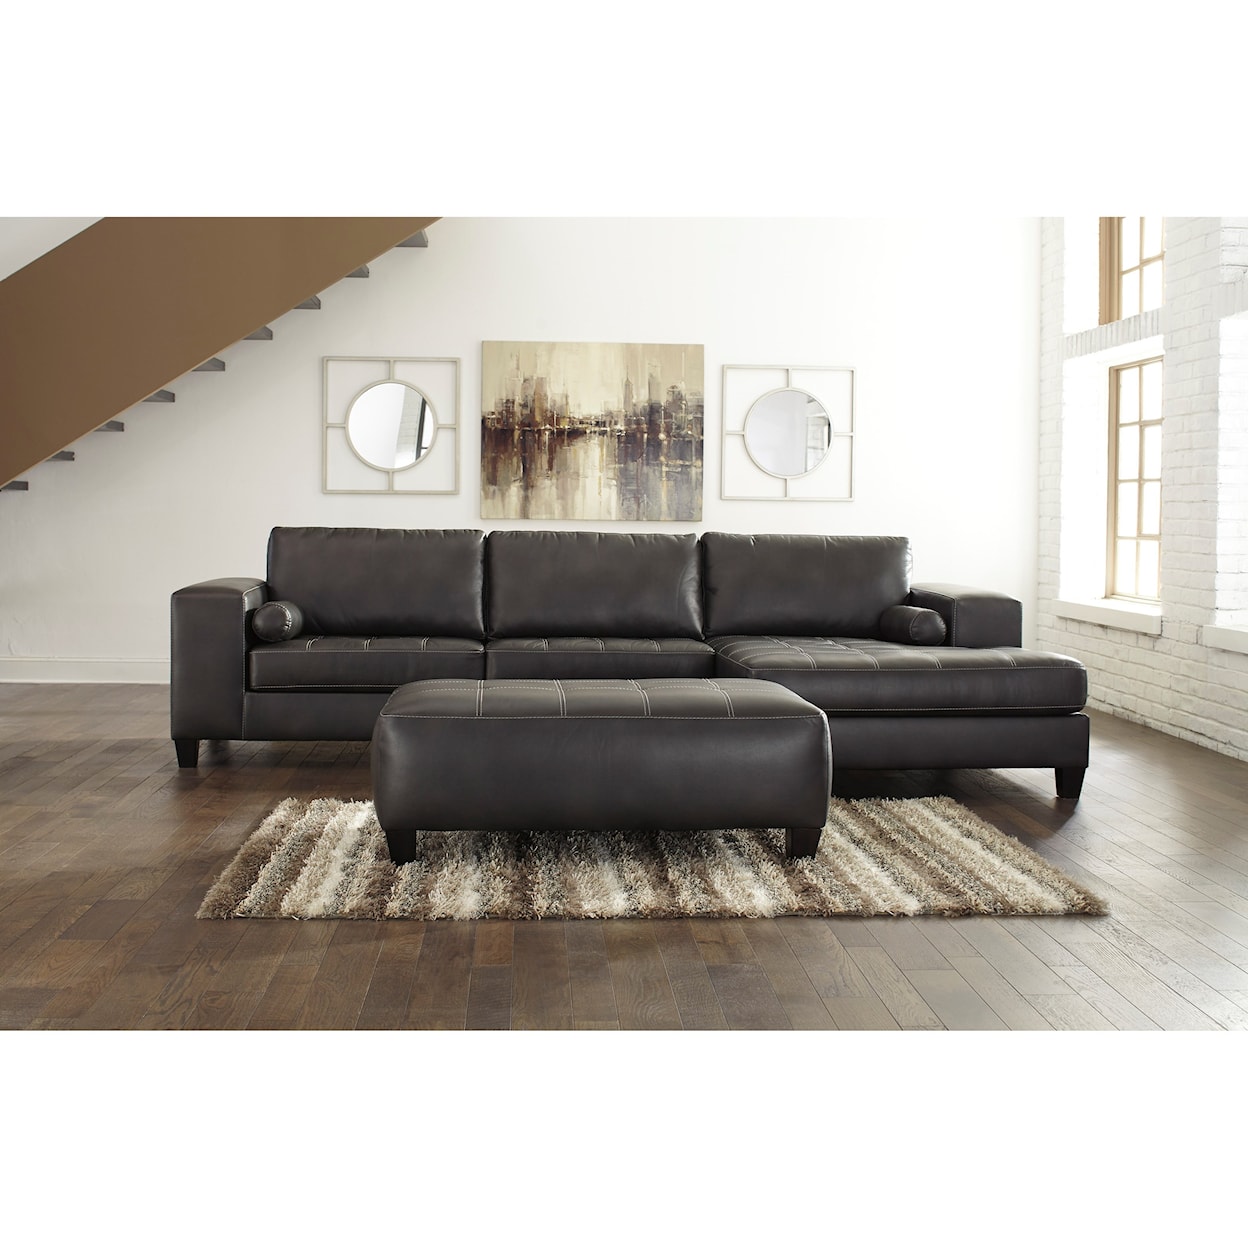 Signature Design by Ashley Nokomis 2-Piece Sectional with Ottoman